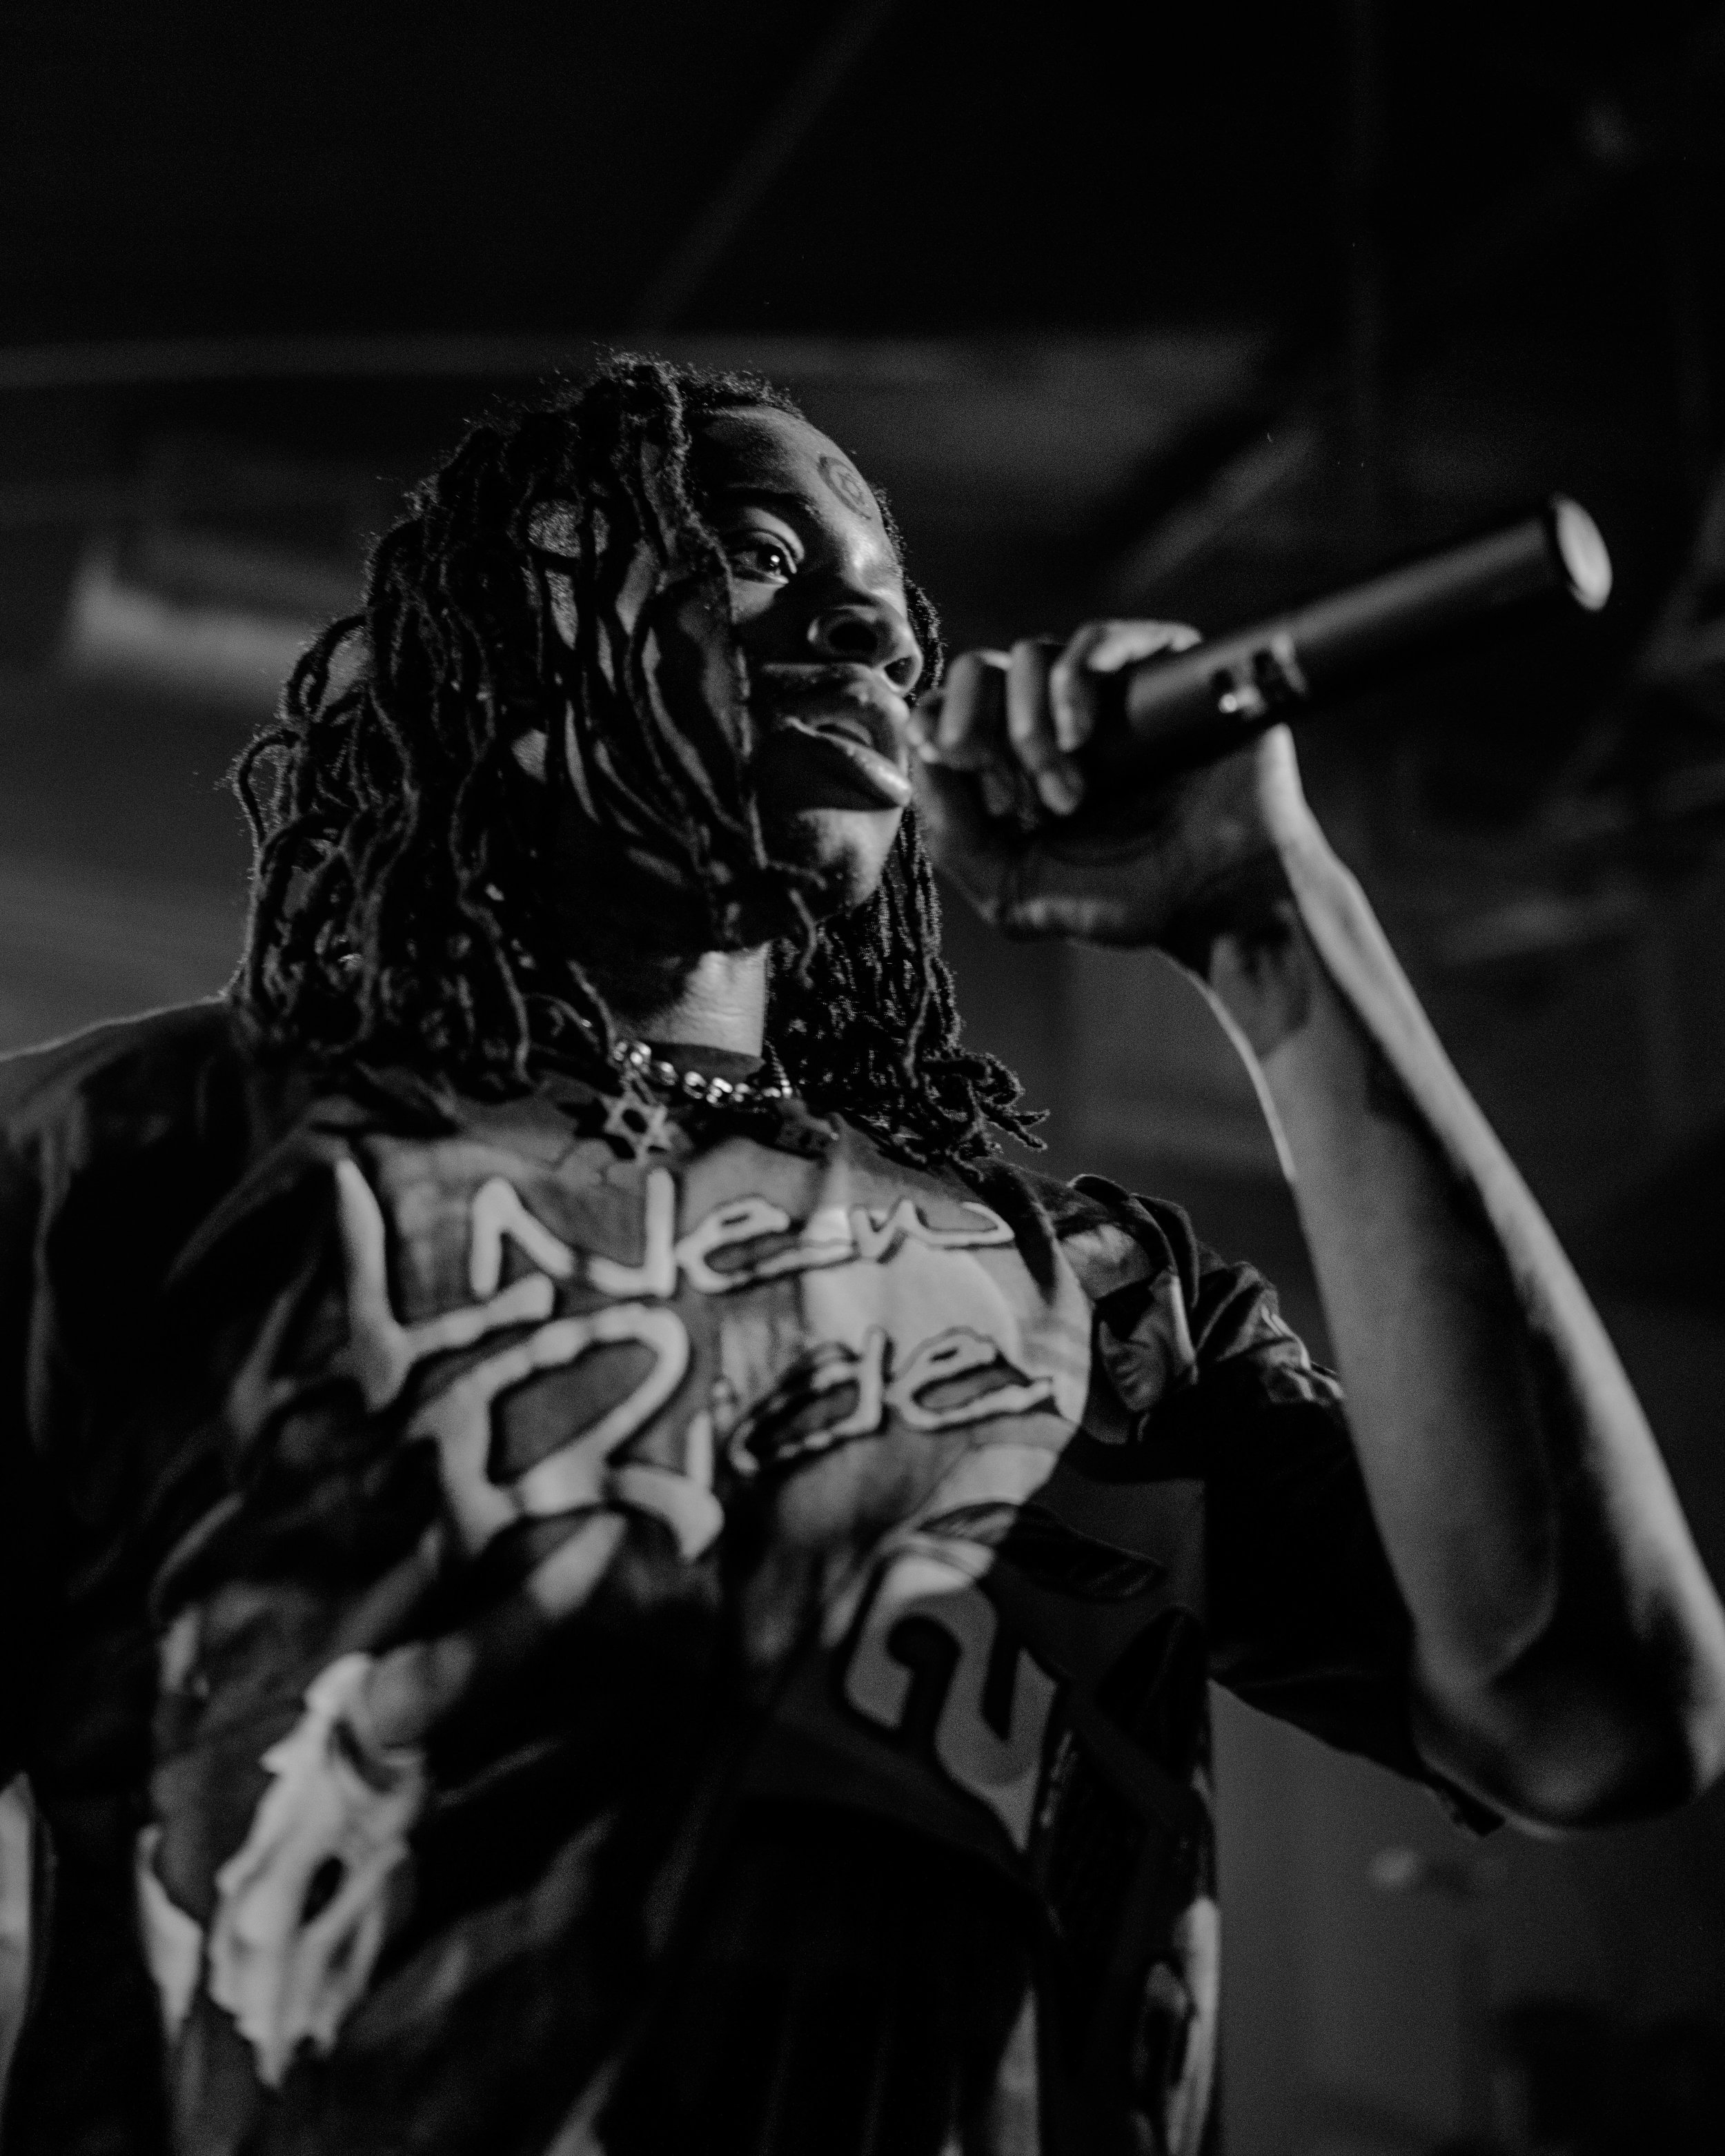 LUCKI brought the heat to Concord... - Concord Music Hall | Facebook